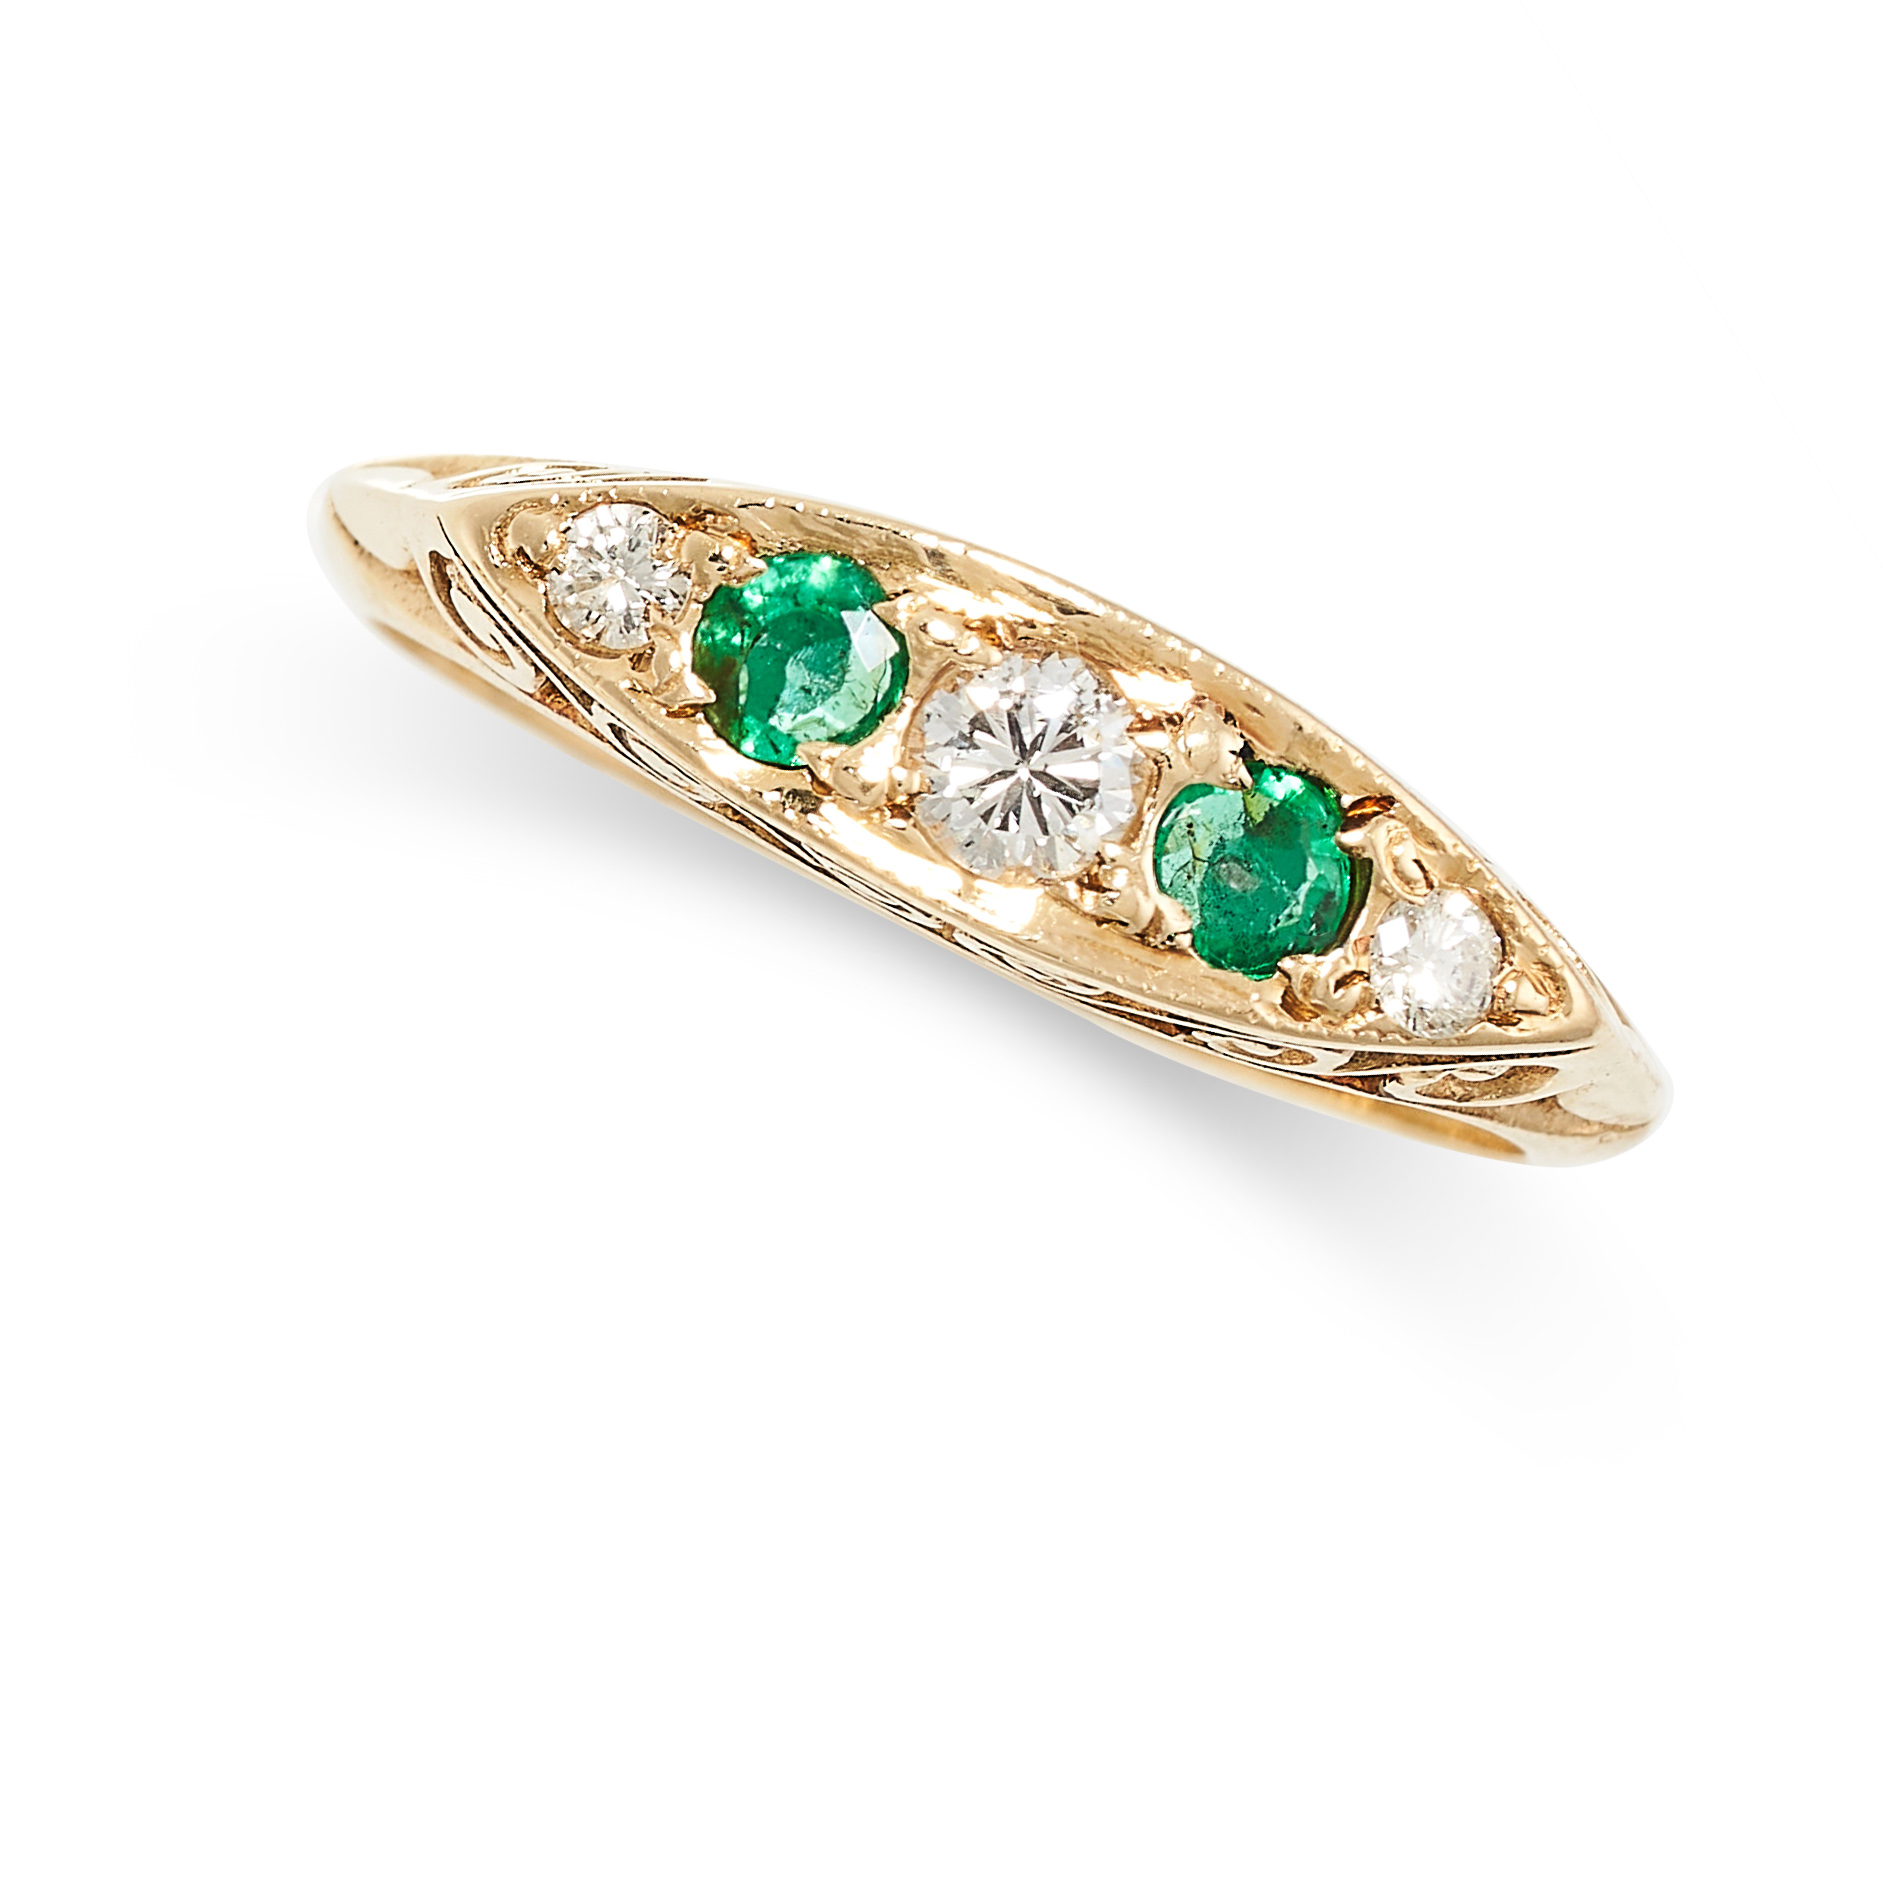 A VINTAGE EMERALD AND DIAMOND RING in 18ct yellow gold, the elliptical face set with a row of